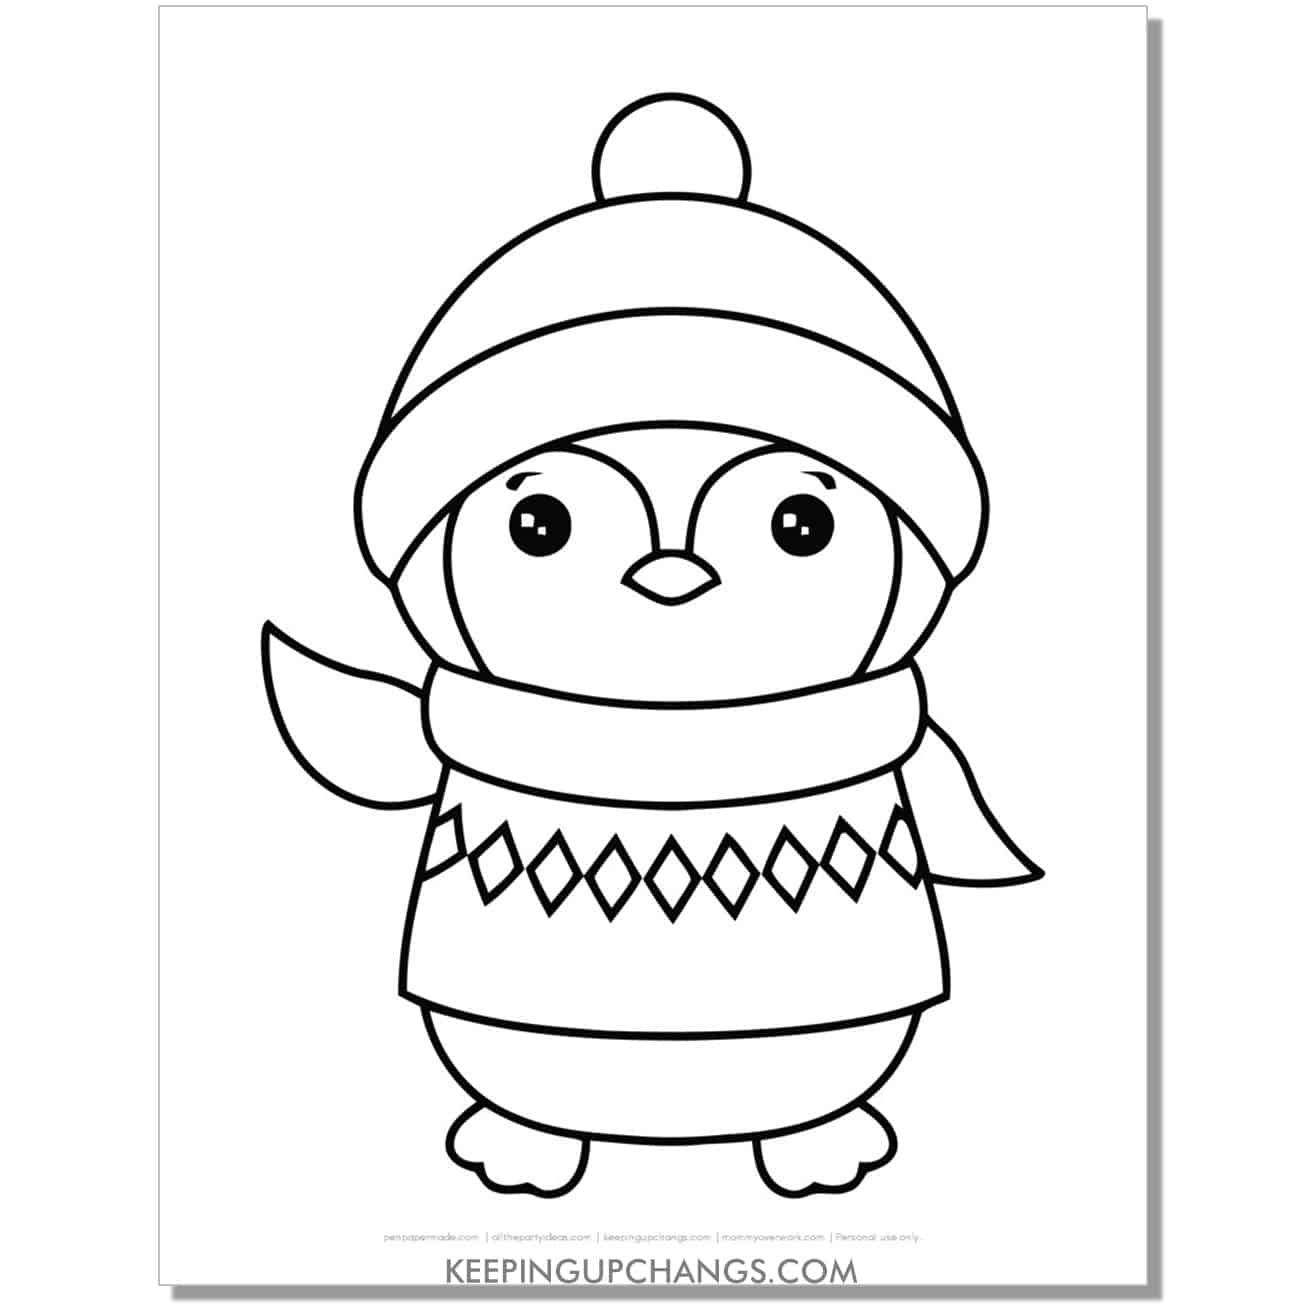 free kawaii winter penguin with christmas sweater coloring page.